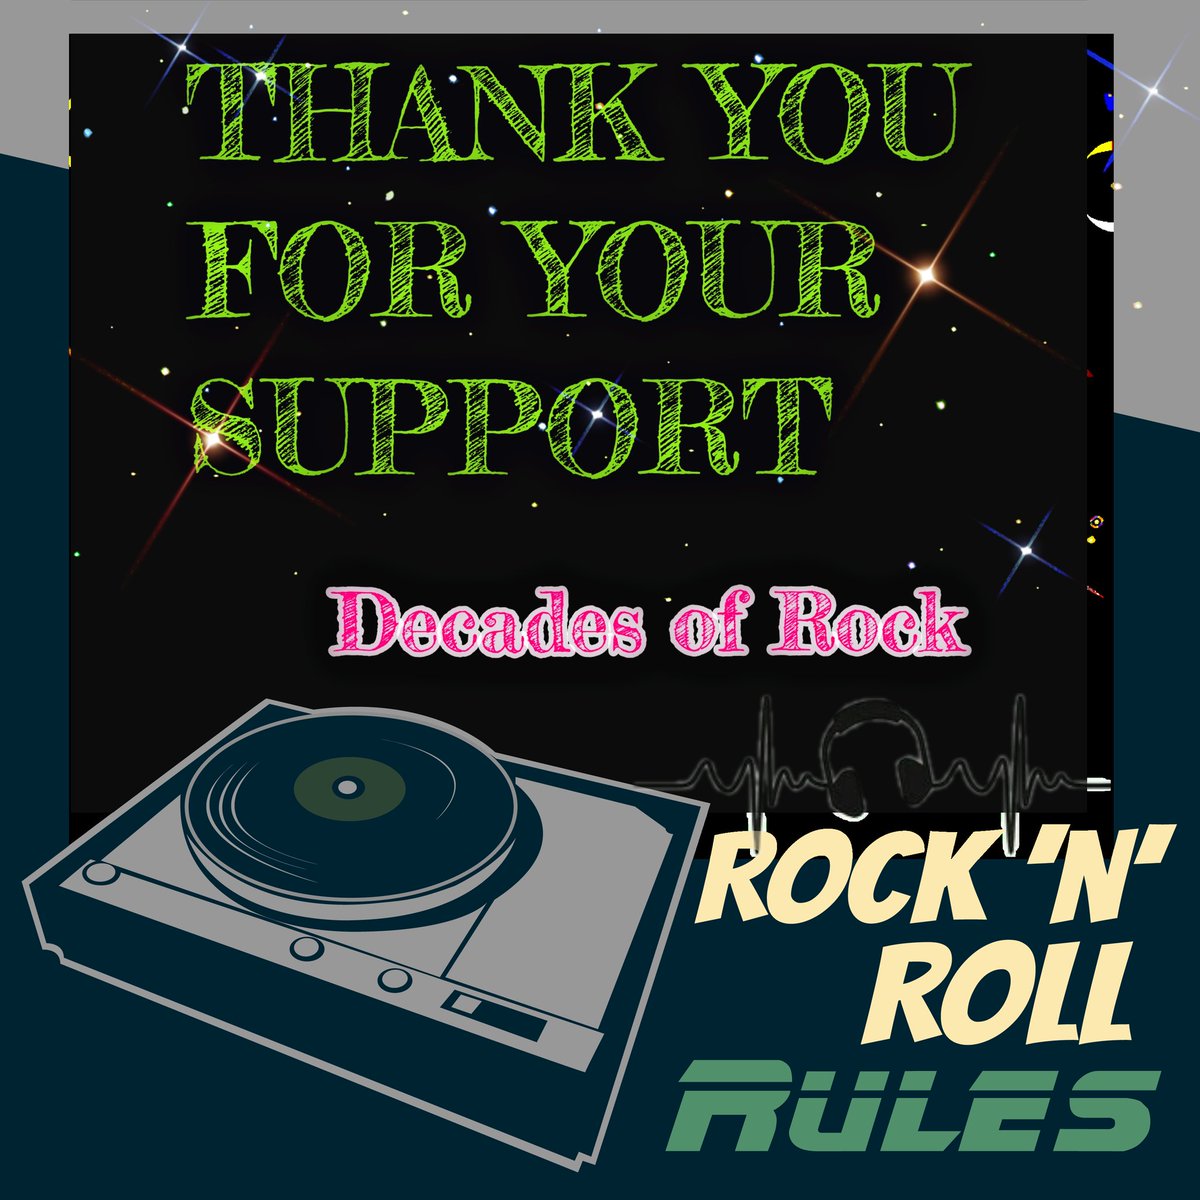 #SundaySupport 

I hope you are enjoying the content I share.if you haven't checked my page out yet please take a minute to do so.. #follow if you like.

Thank you to everyone who already follows and interacts, it's much appreciated. 
Keep that music loud and keep on rockin' 🤘🏻